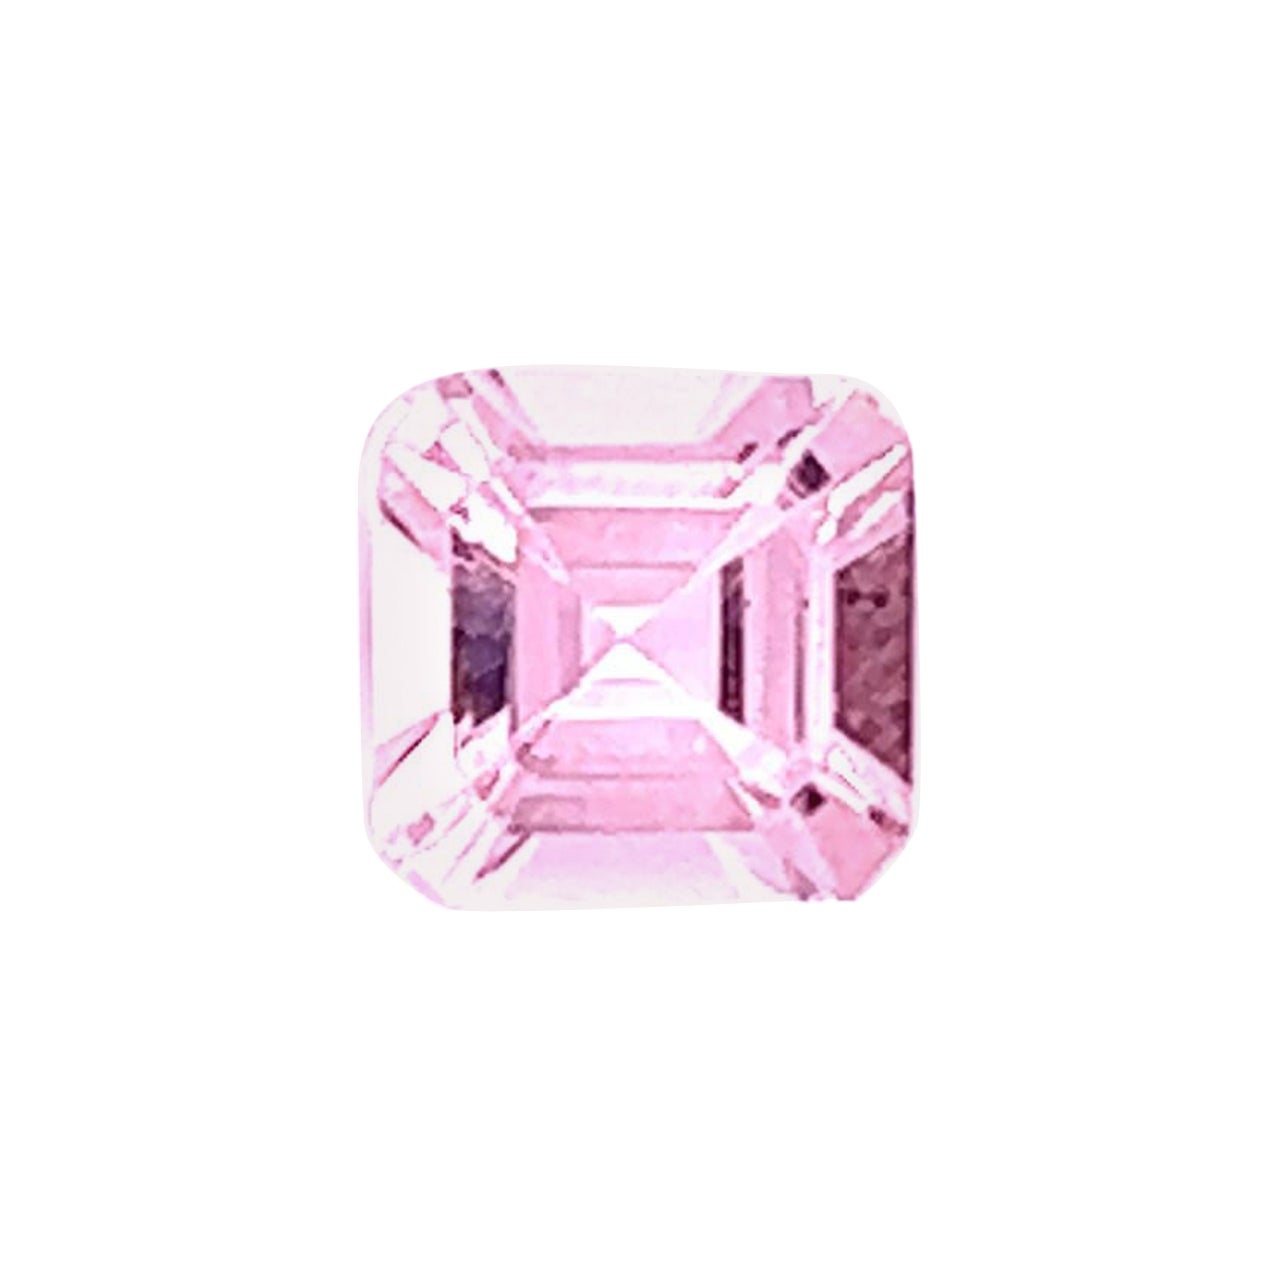 1.37 Carat AAA Natural Pink Morganite Asher Cut Shape Loose Gemstone Jewelry For Sale